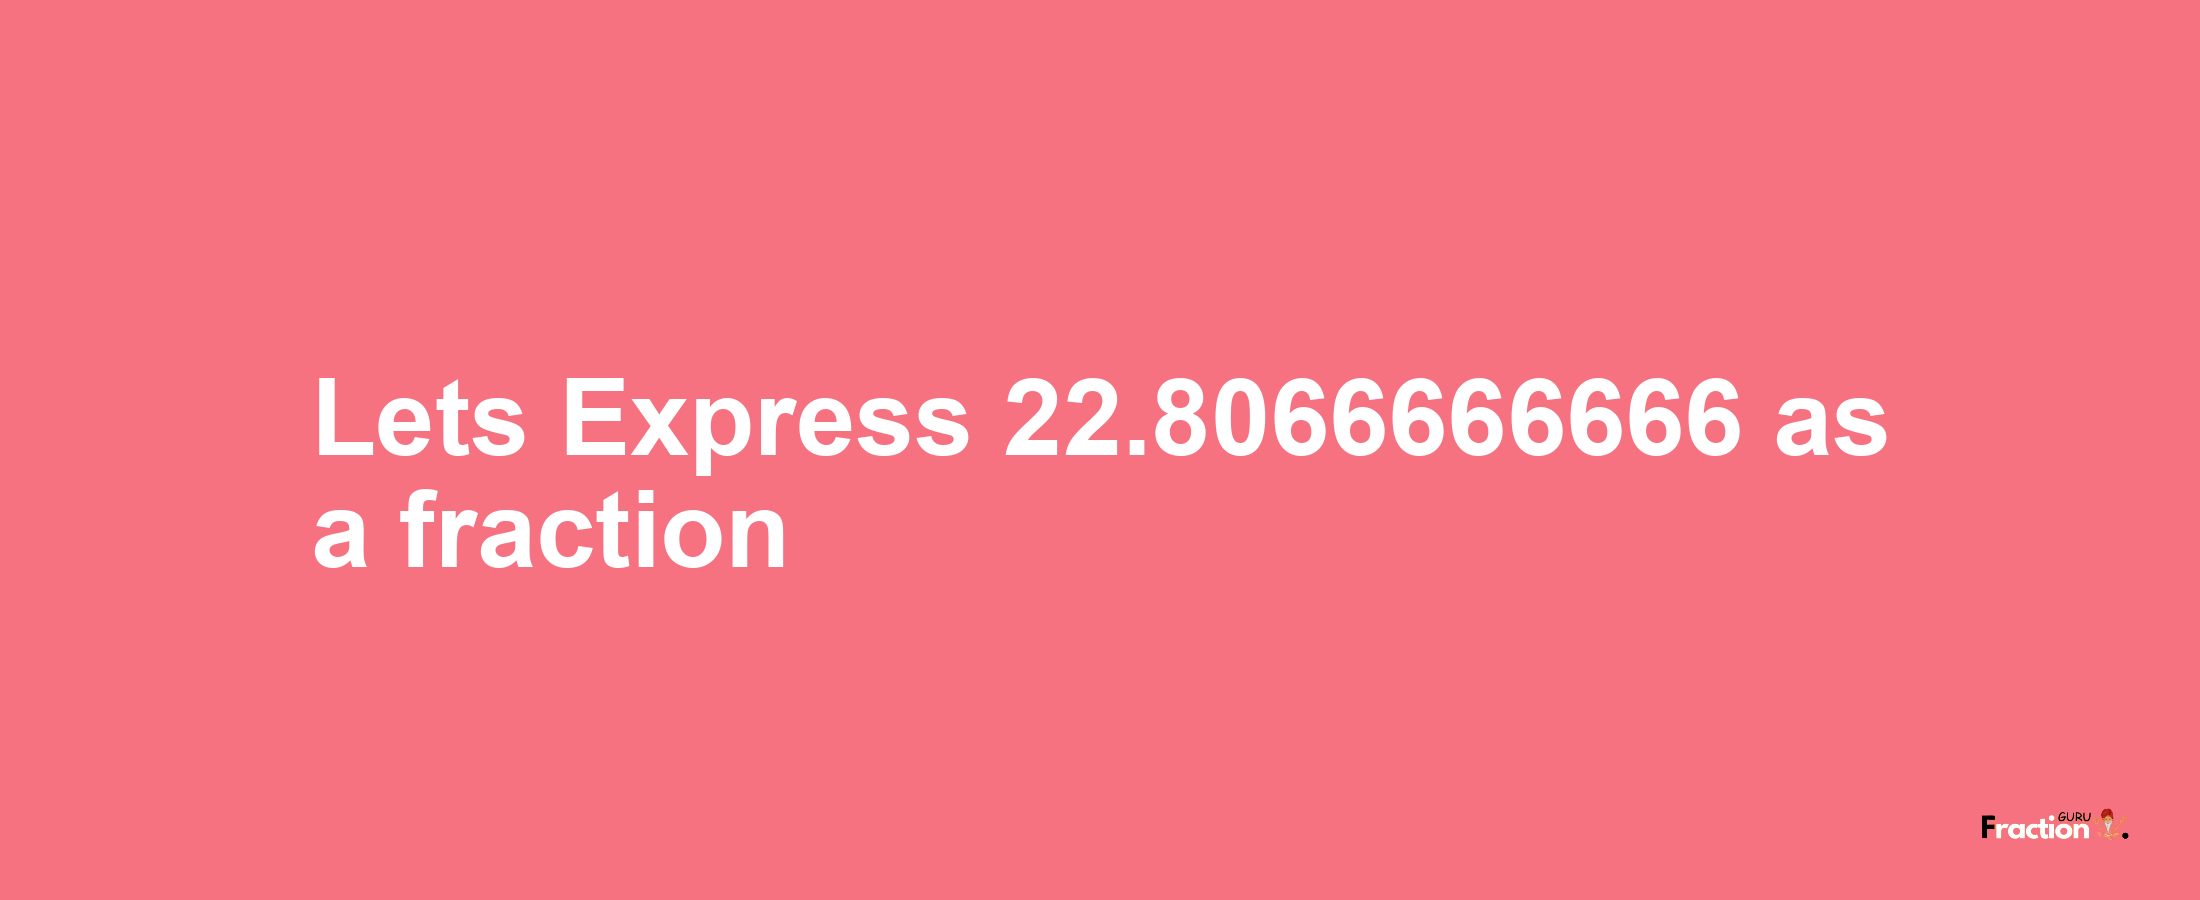 Lets Express 22.8066666666 as afraction